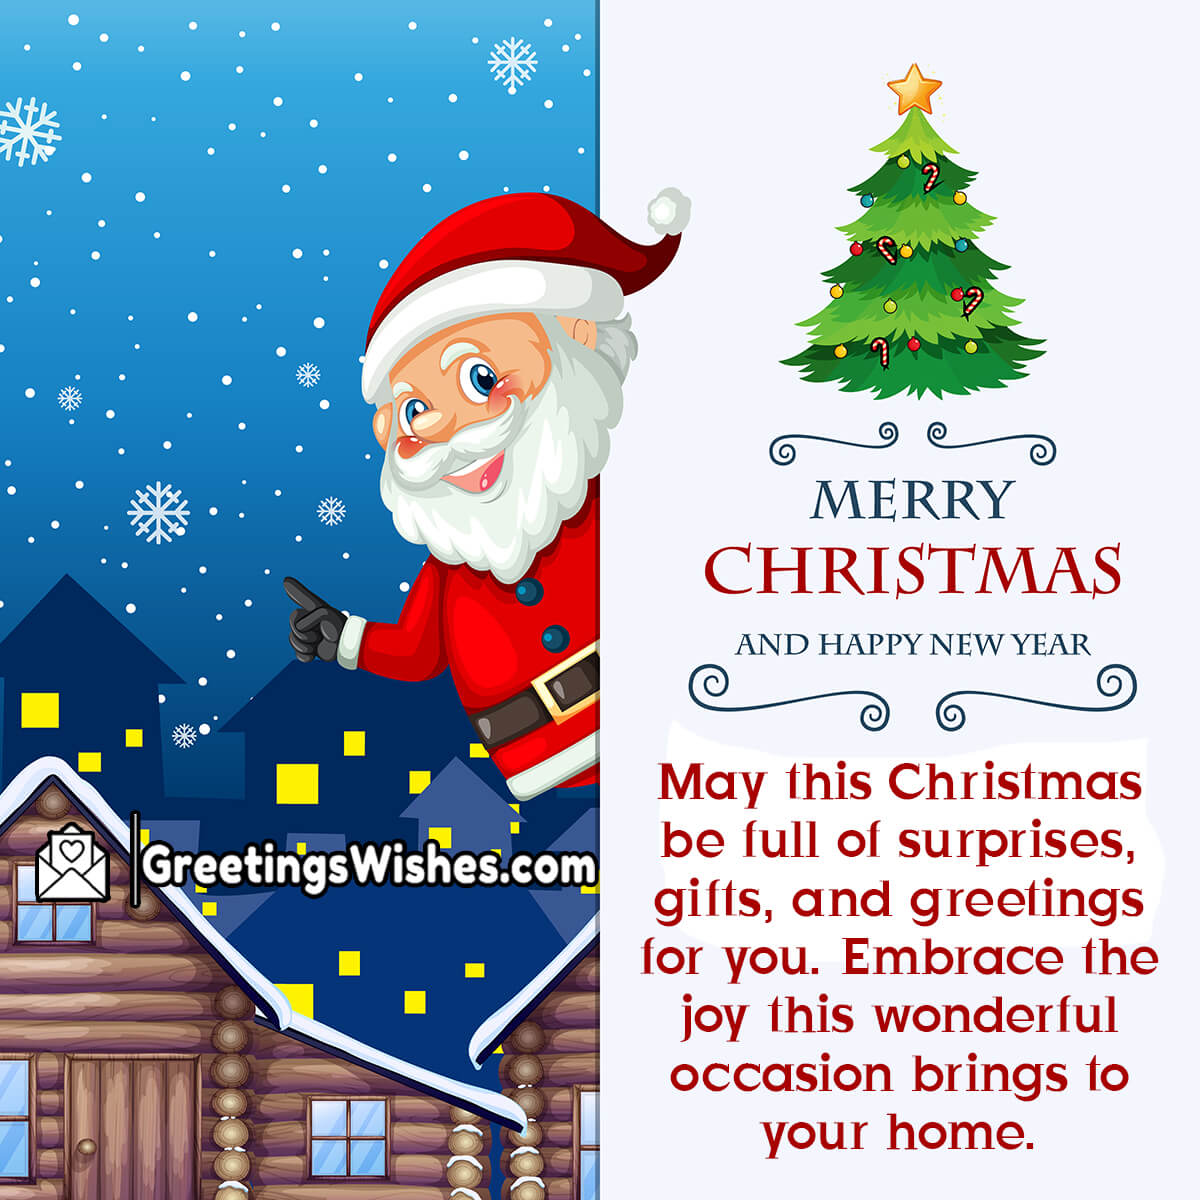 Merry Christmas And Happy New Year Greeting Card With Santa Clau